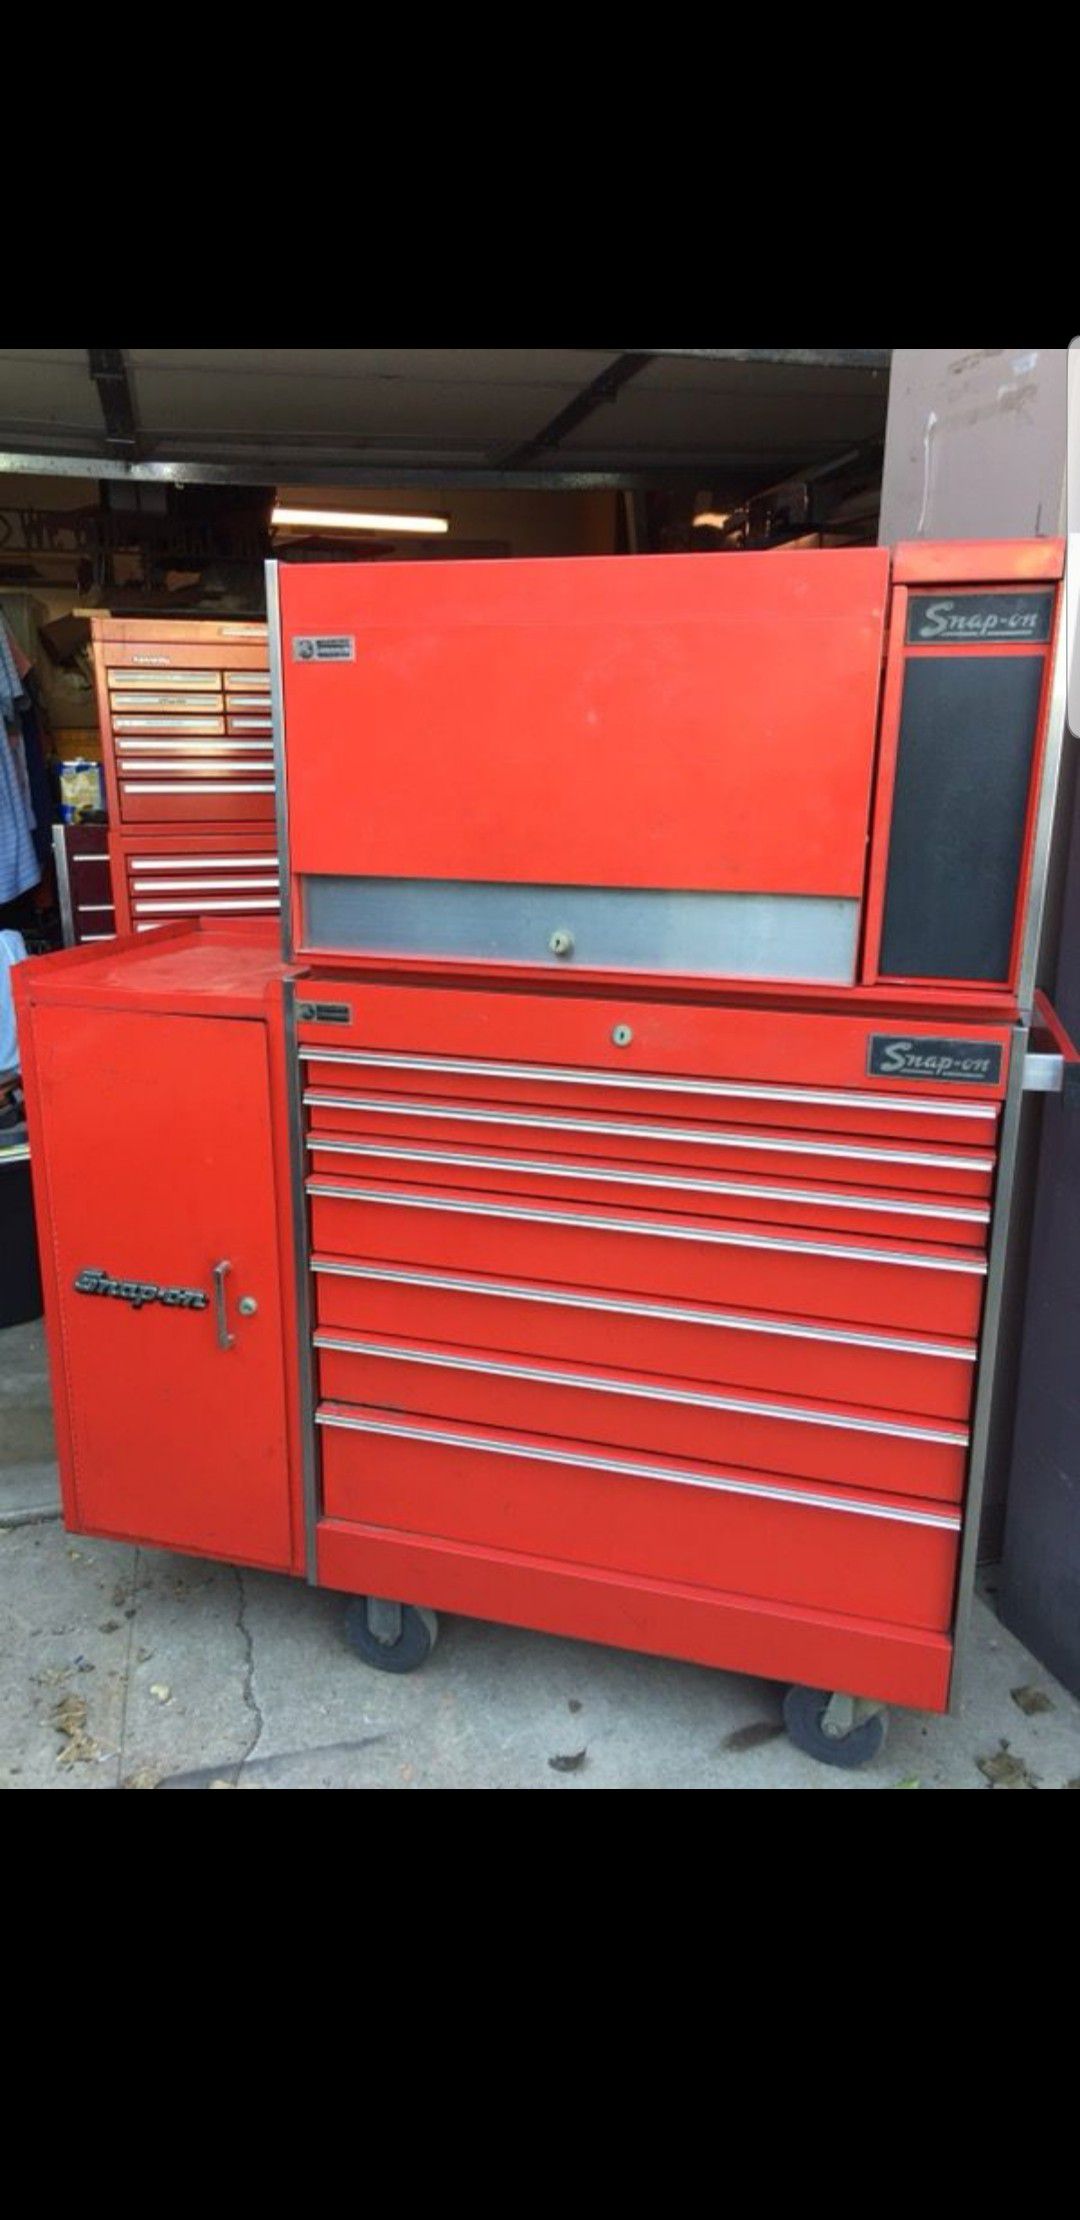 Snap-on tool box in good condition